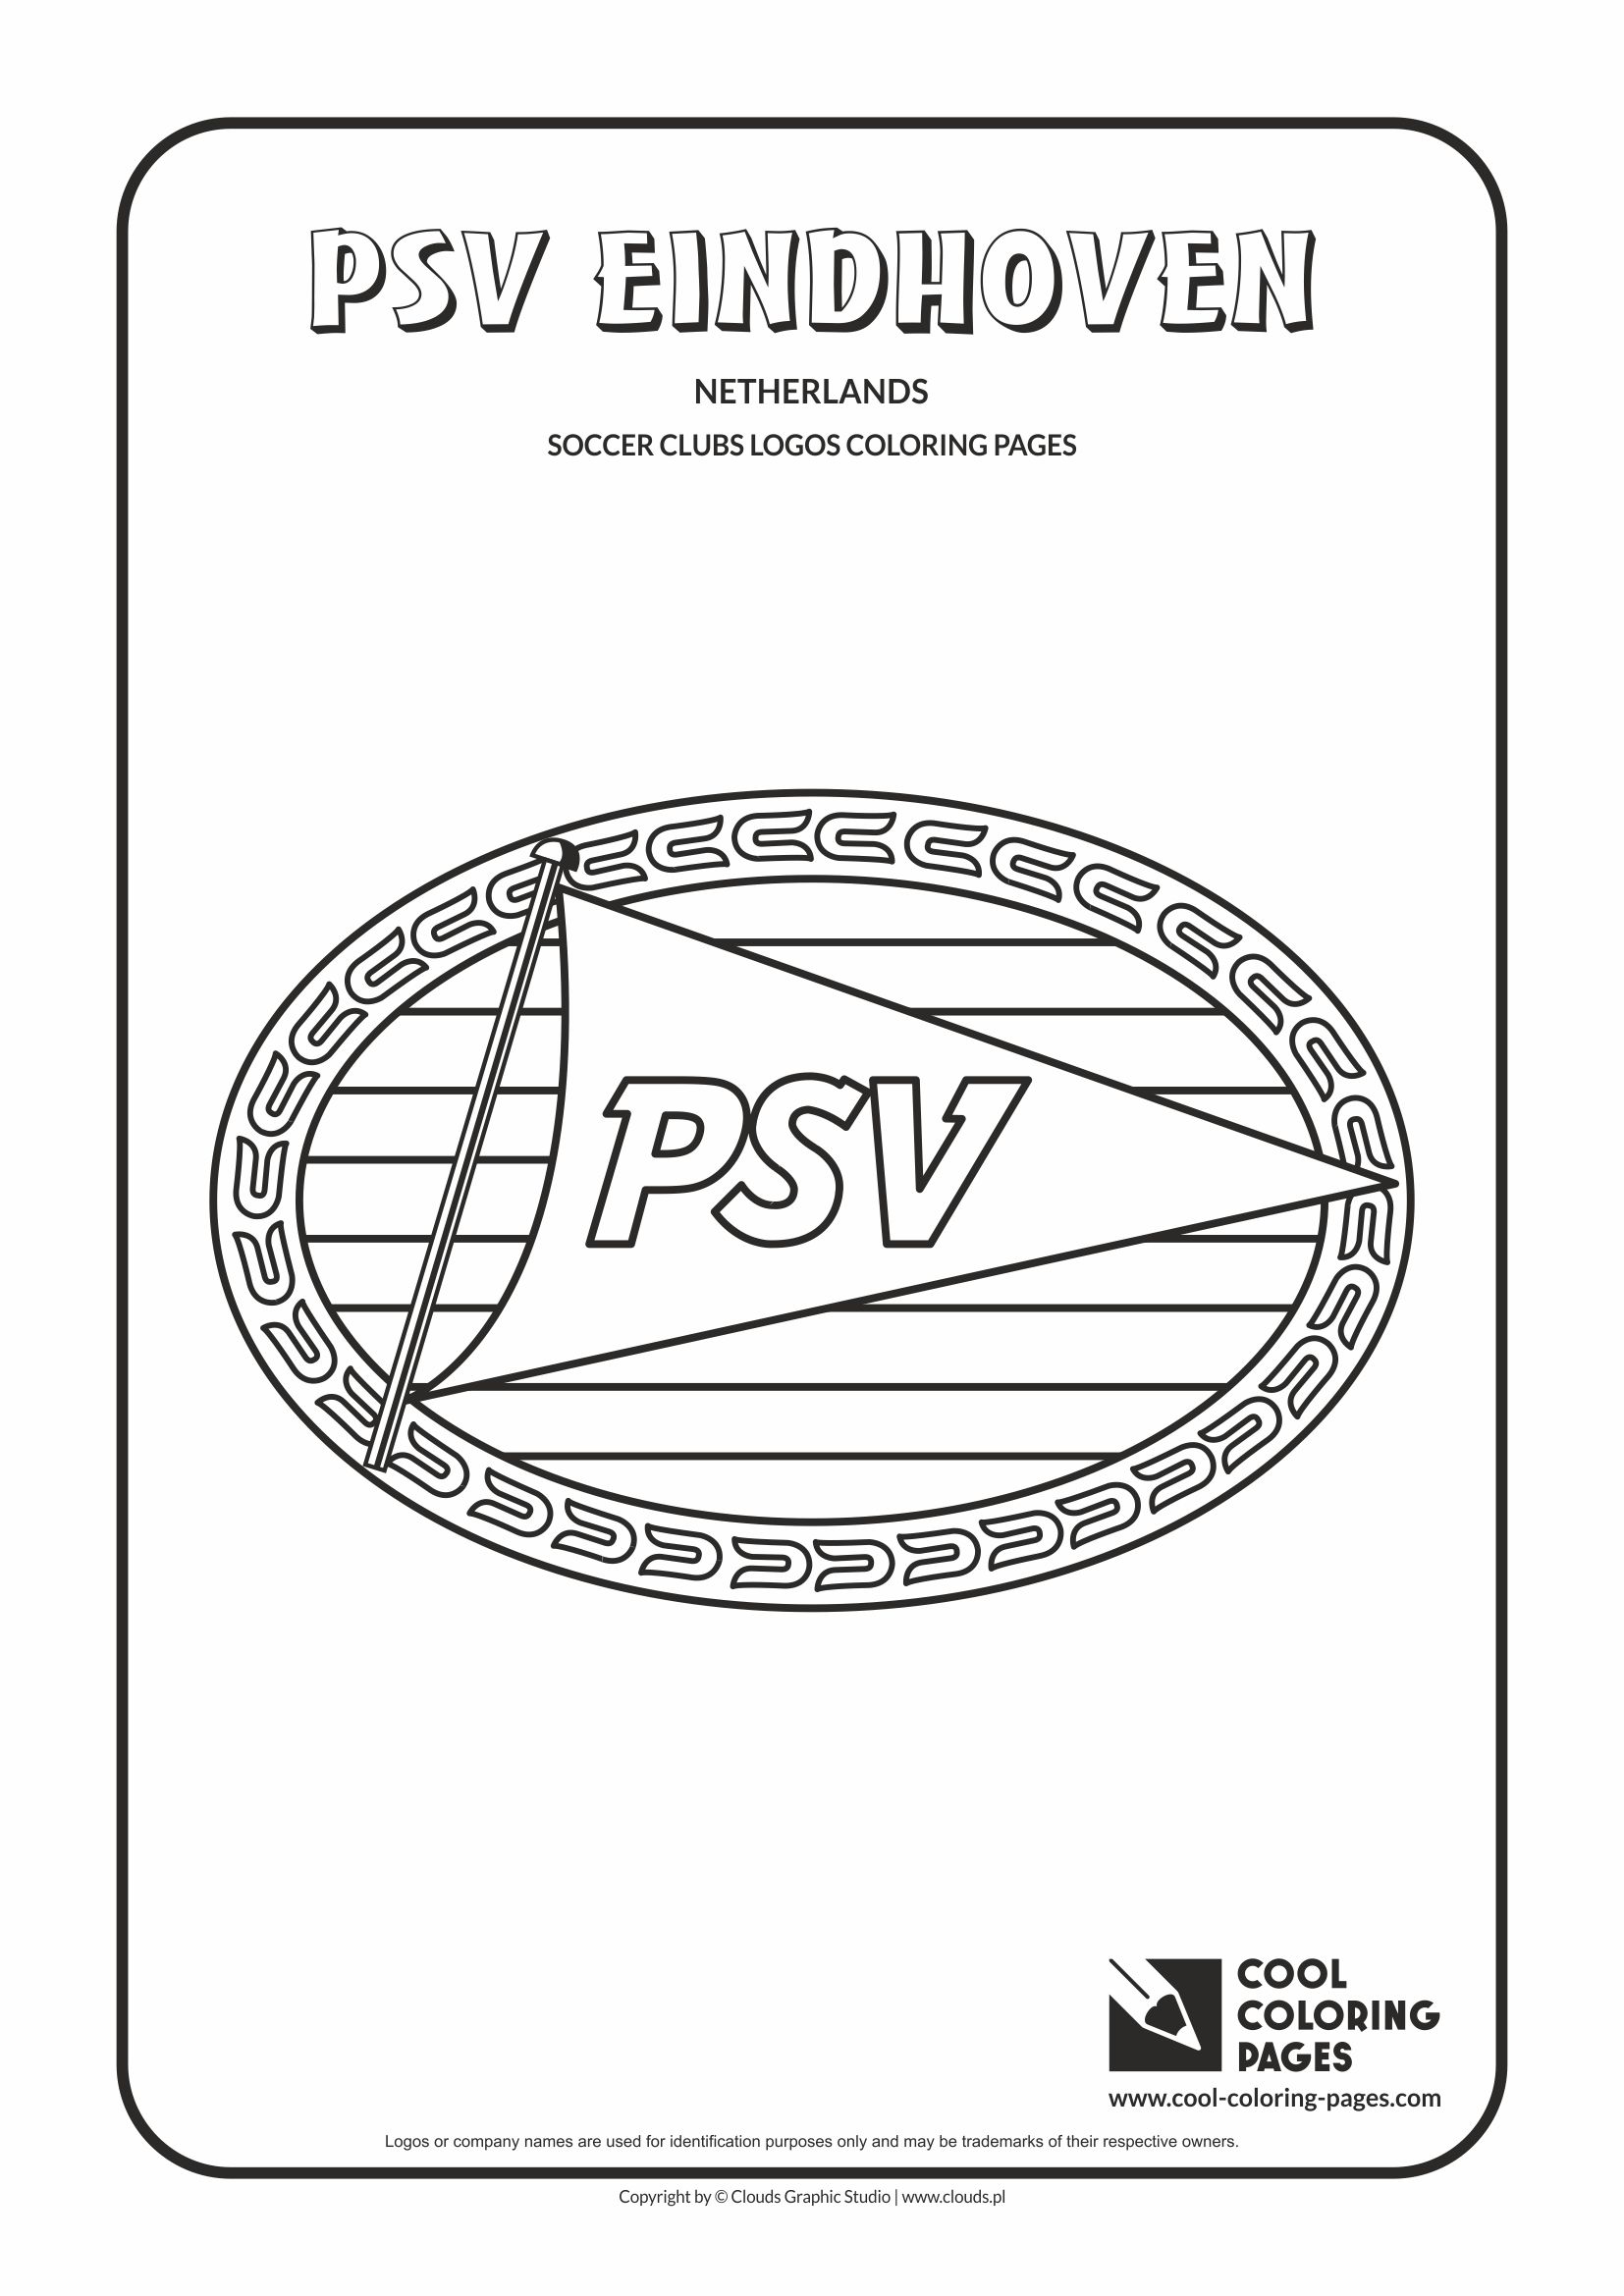 Cool Coloring Pages psv eindhoven logo coloring page Archives - Cool ...